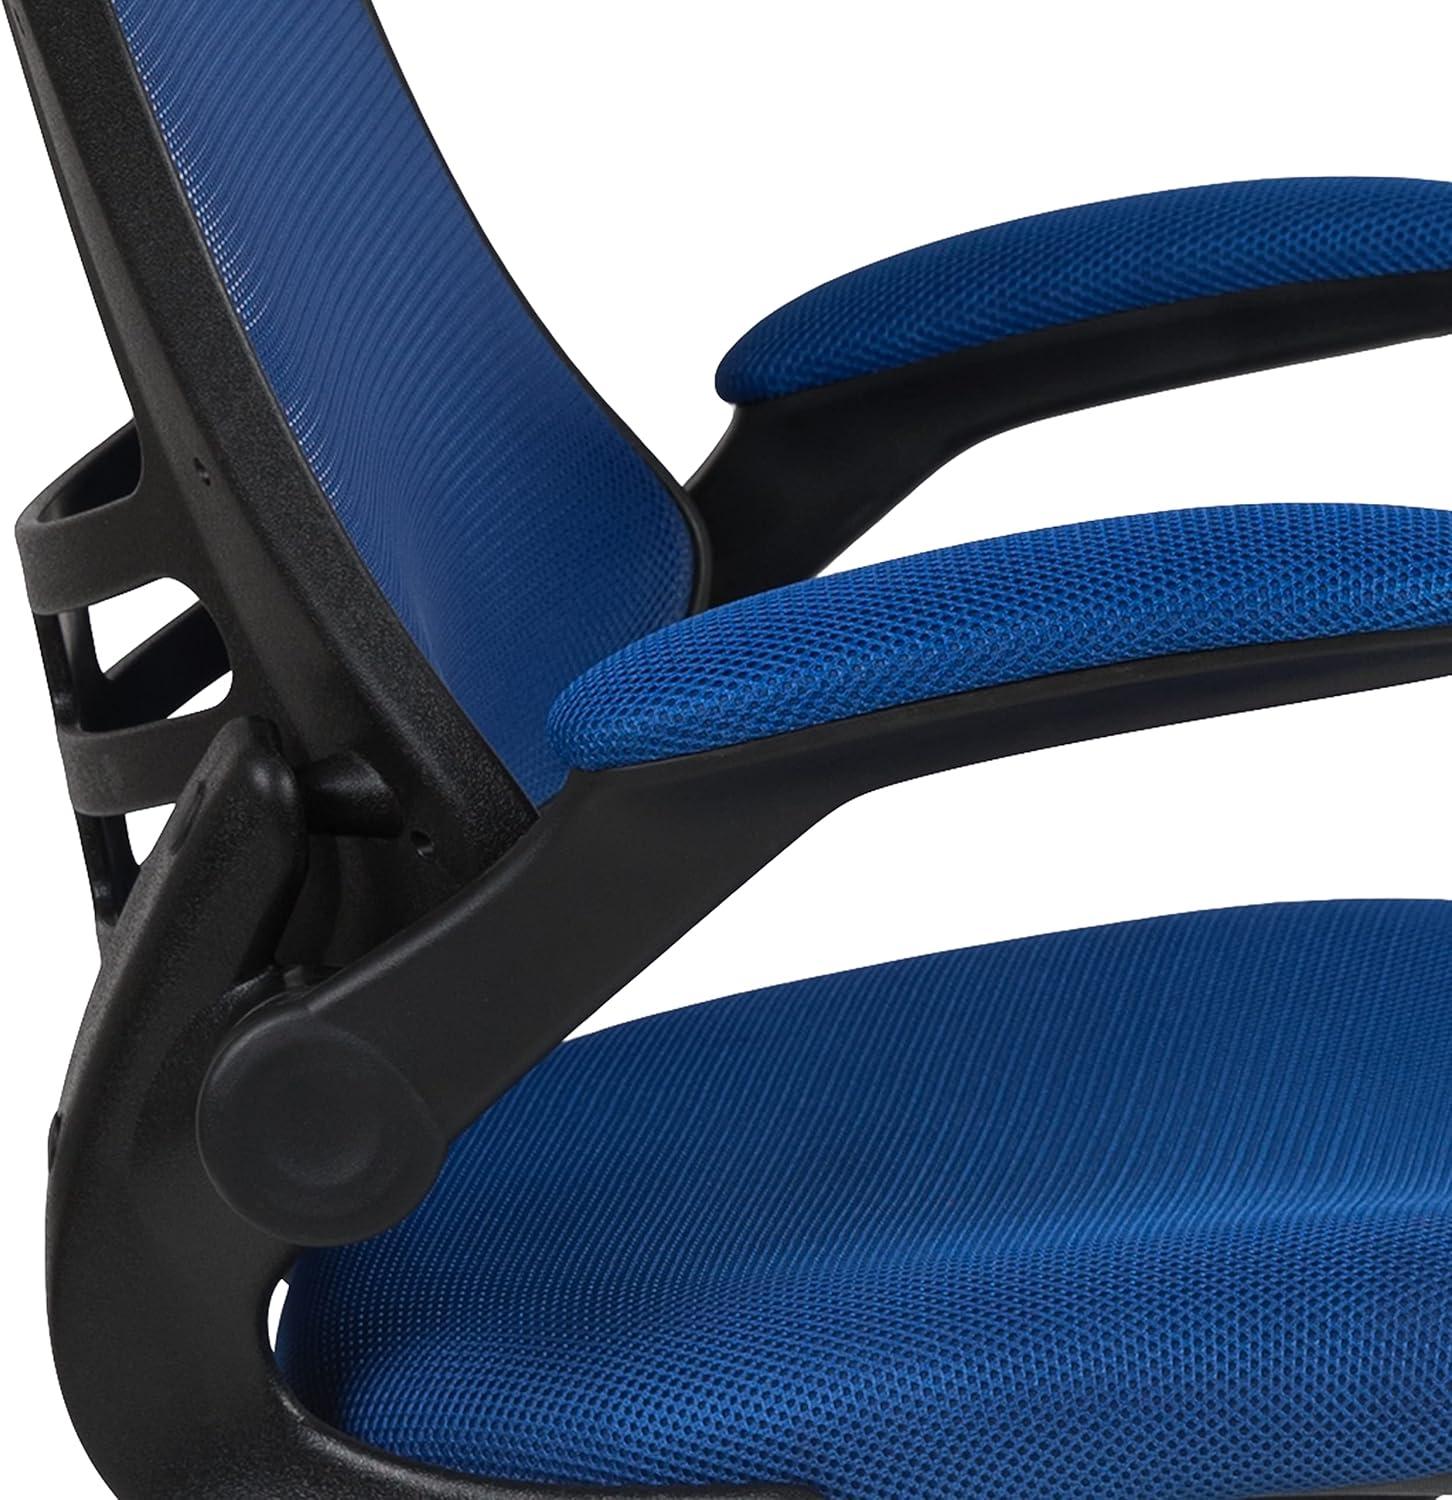 Blue Mesh Mid-Back Ergonomic Office Chair with Adjustable Arms